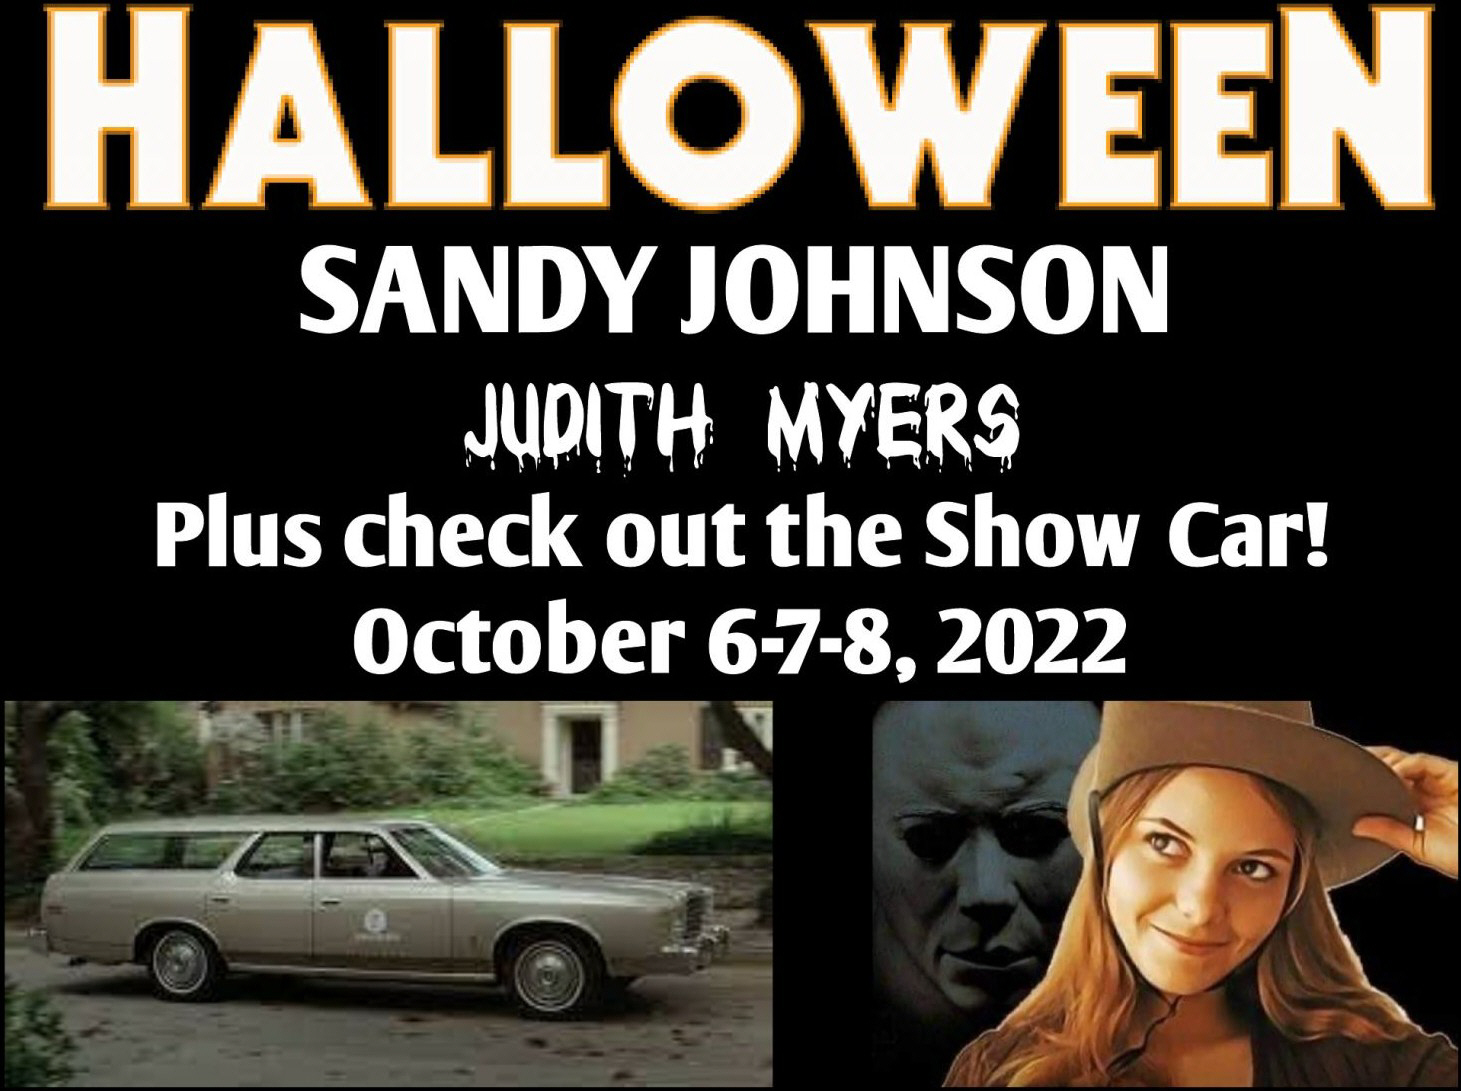 "Judith Myers" From Halloween Movie at 25th annual Endless Summer Cruisin' October 6-8